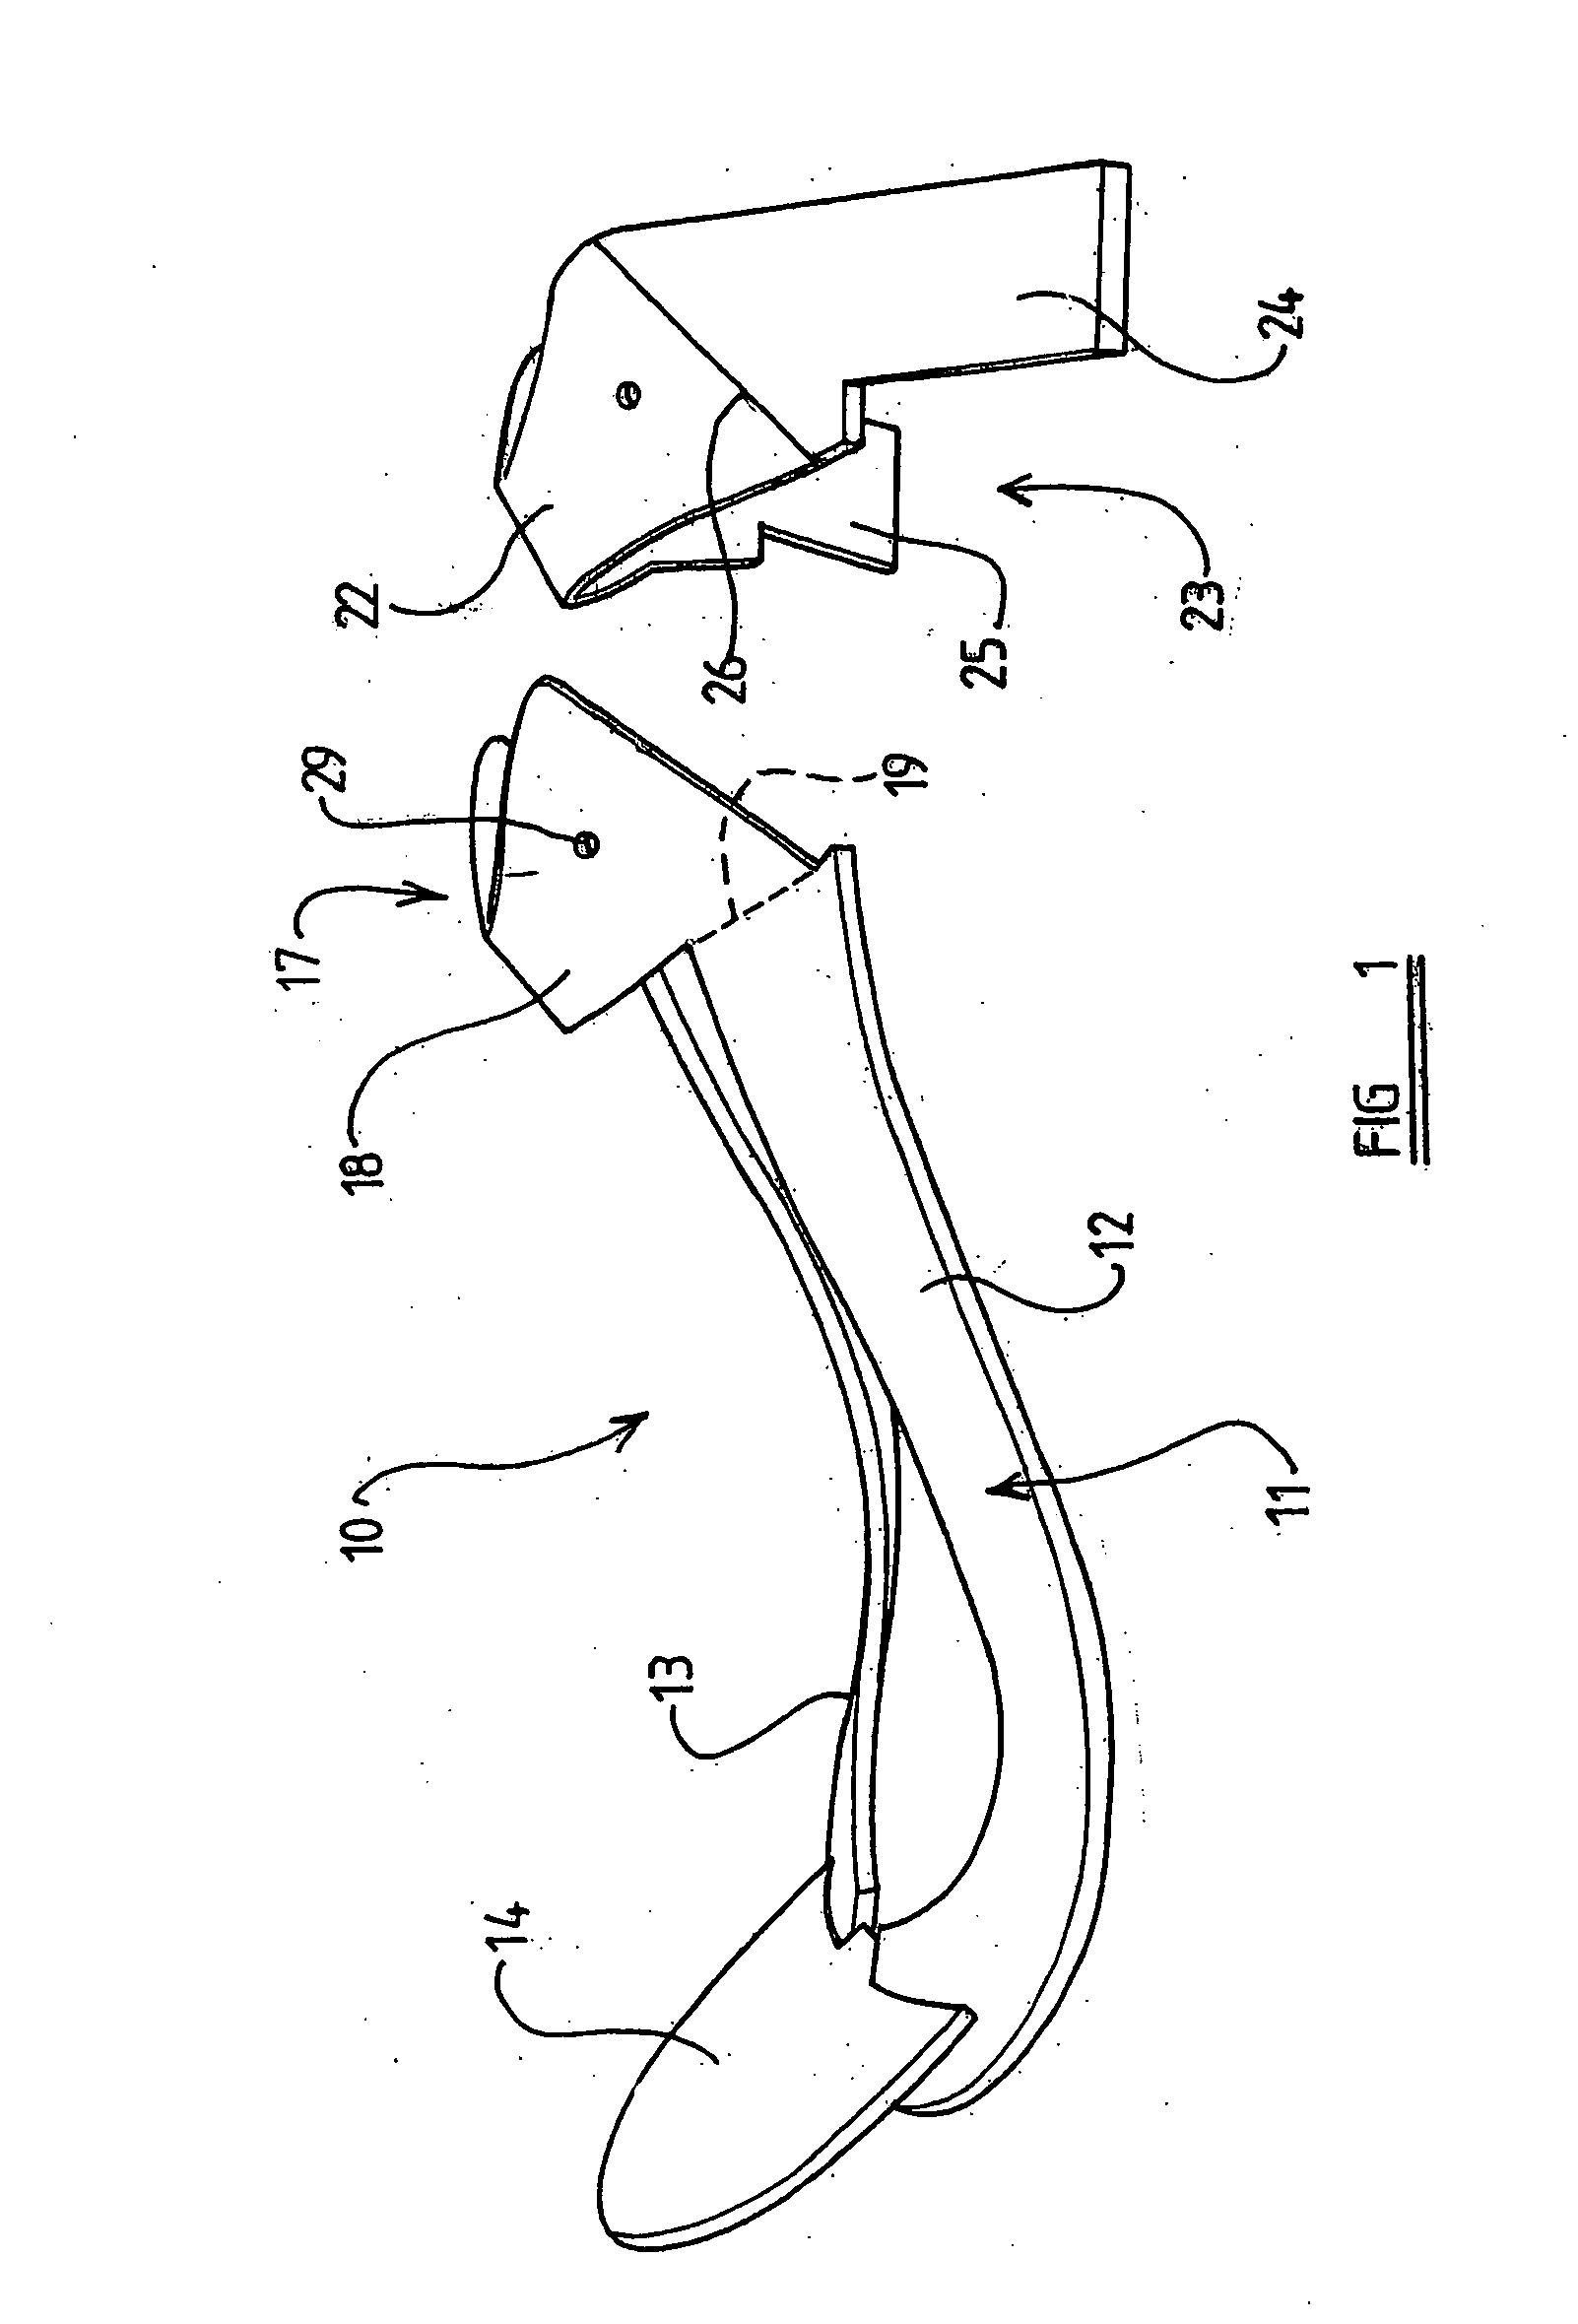 Tree for a saddle, an insert for a saddle tree and a saddle tree body